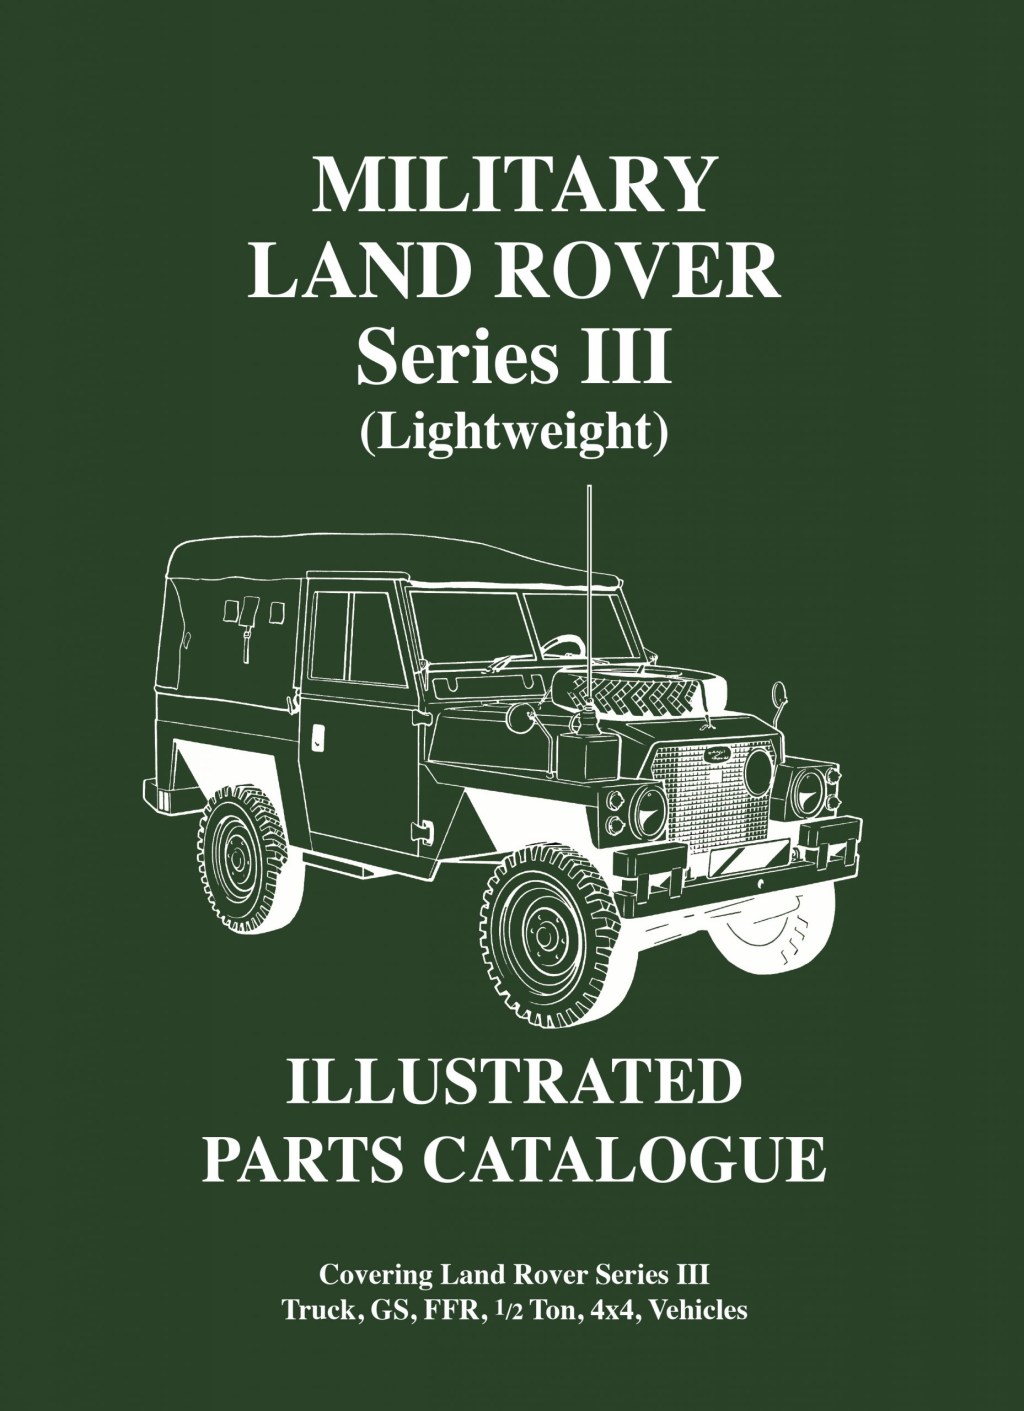 Picture of: Military Land Rover, Series III Lightweight, Illustrated Parts Catalogue